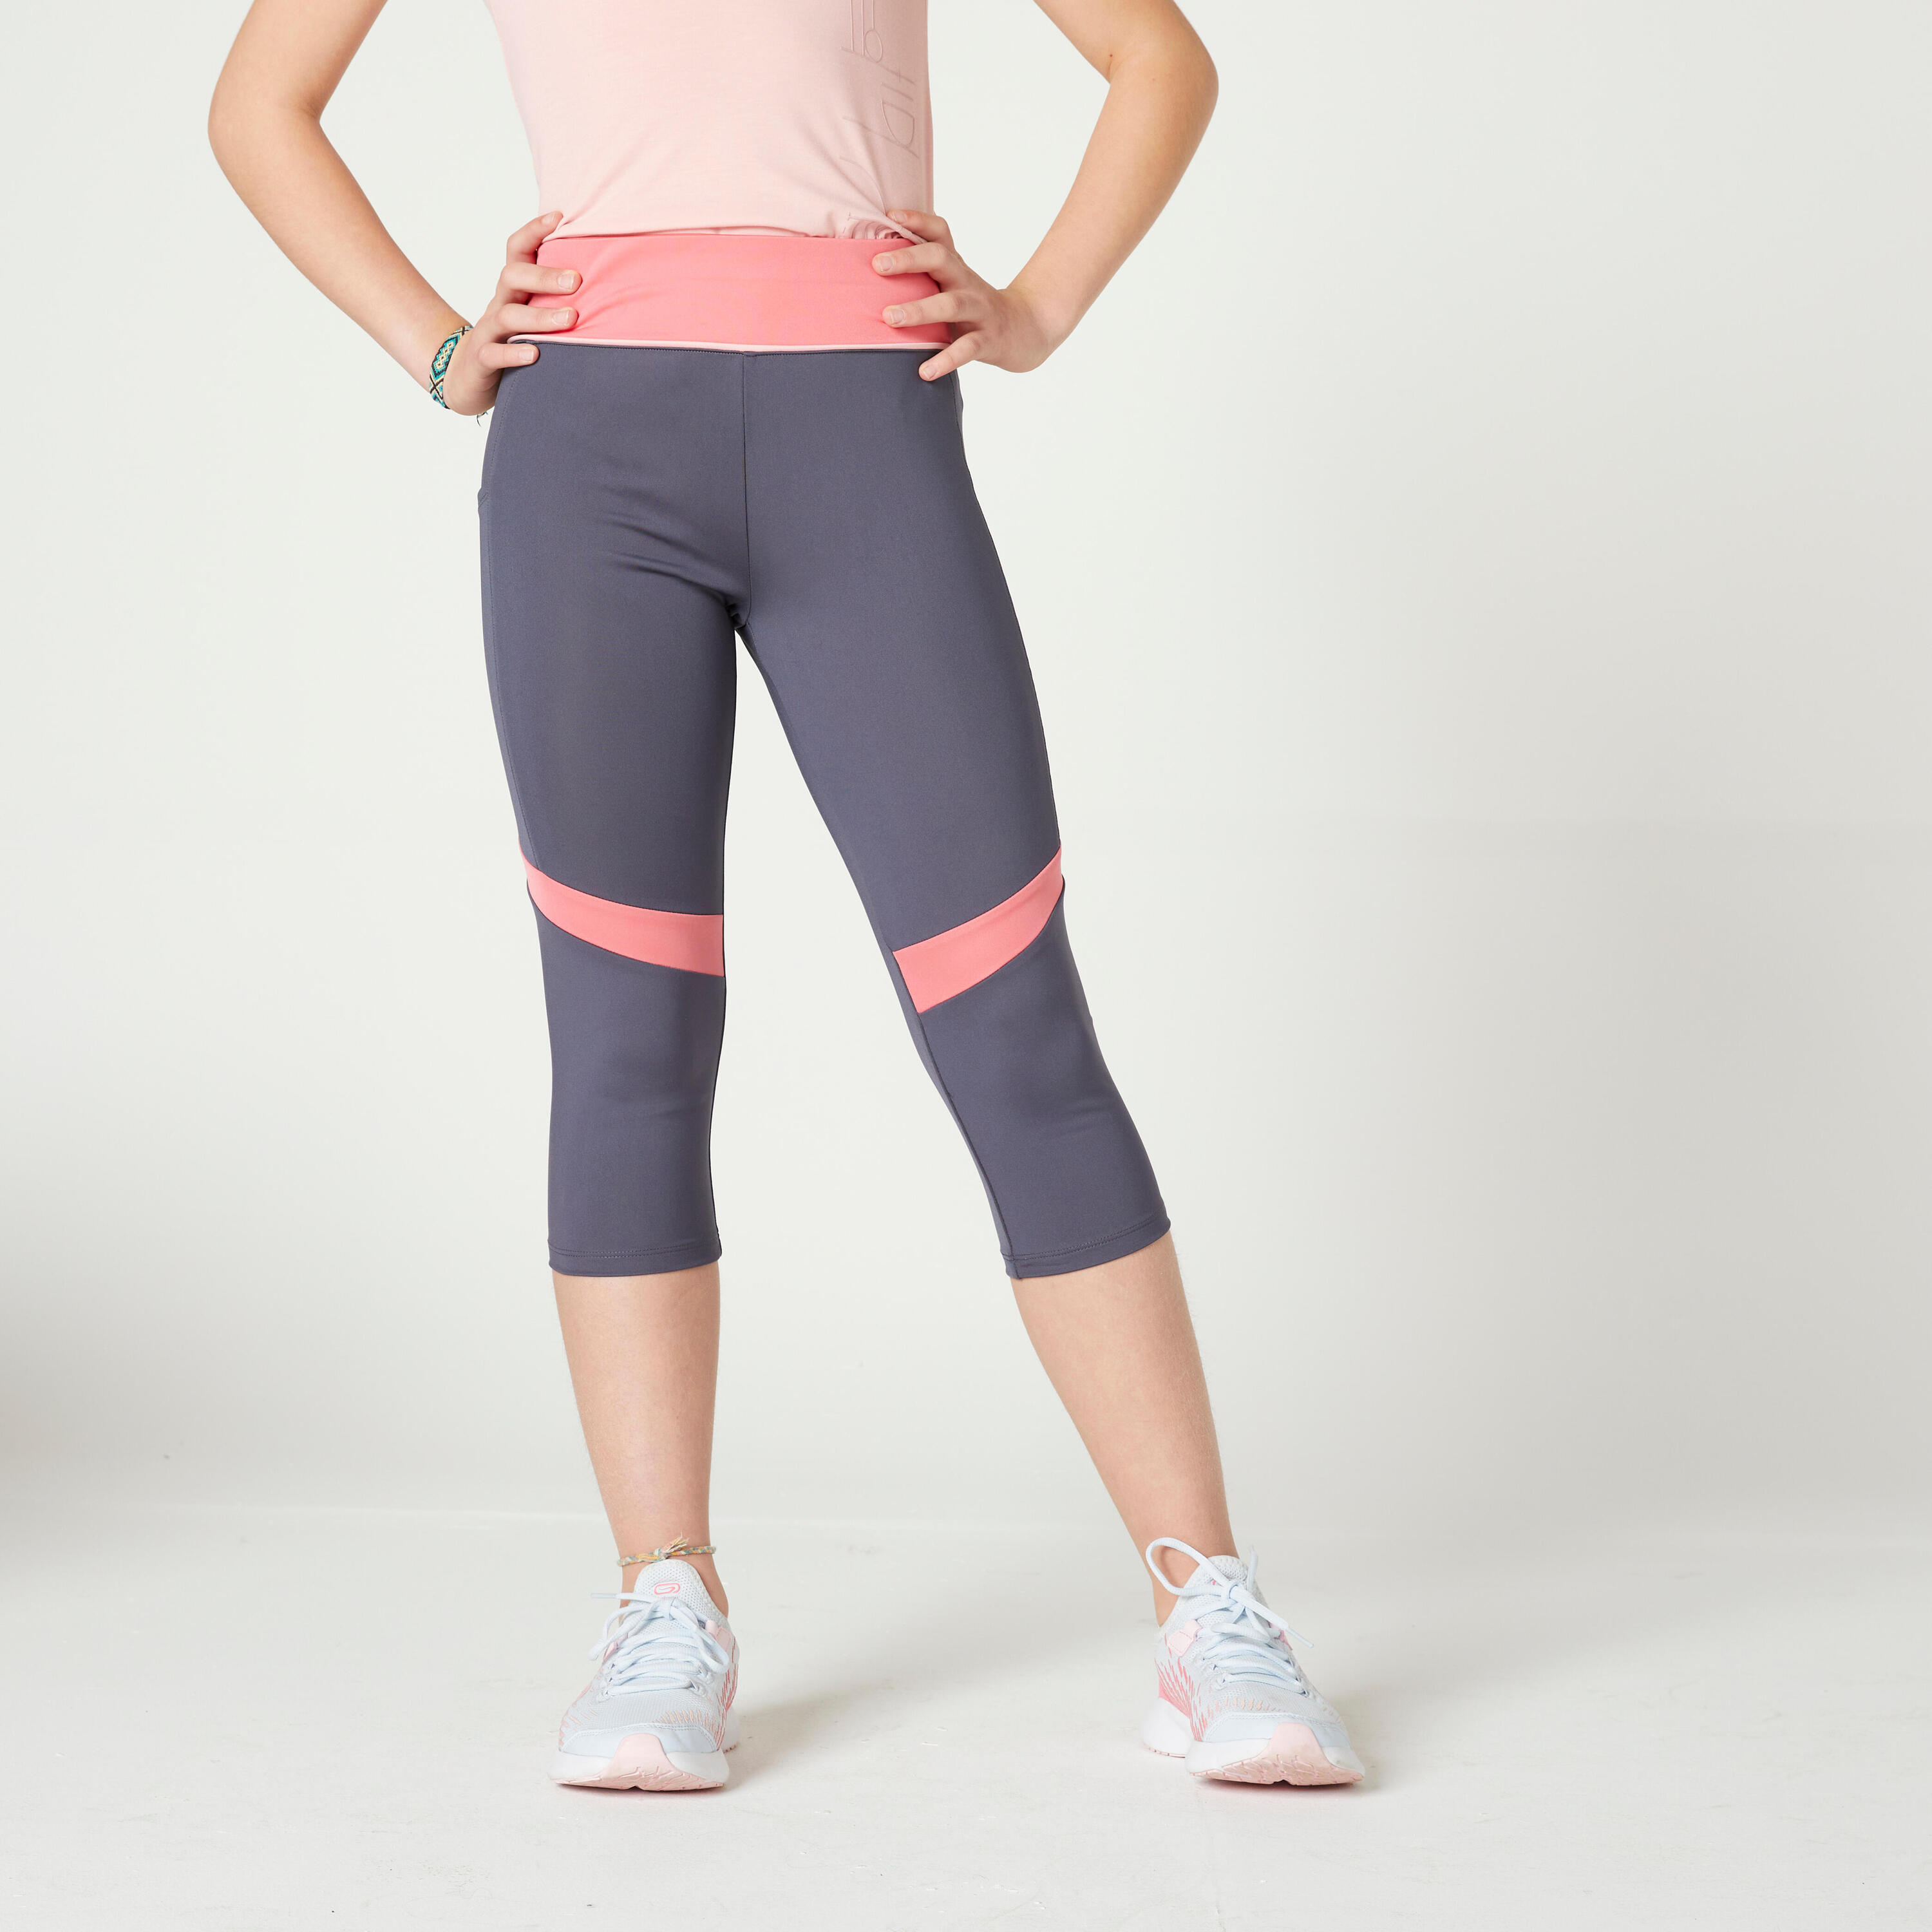 Girls' Breathable Cropped Bottoms S500 - Grey/Pink 1/4